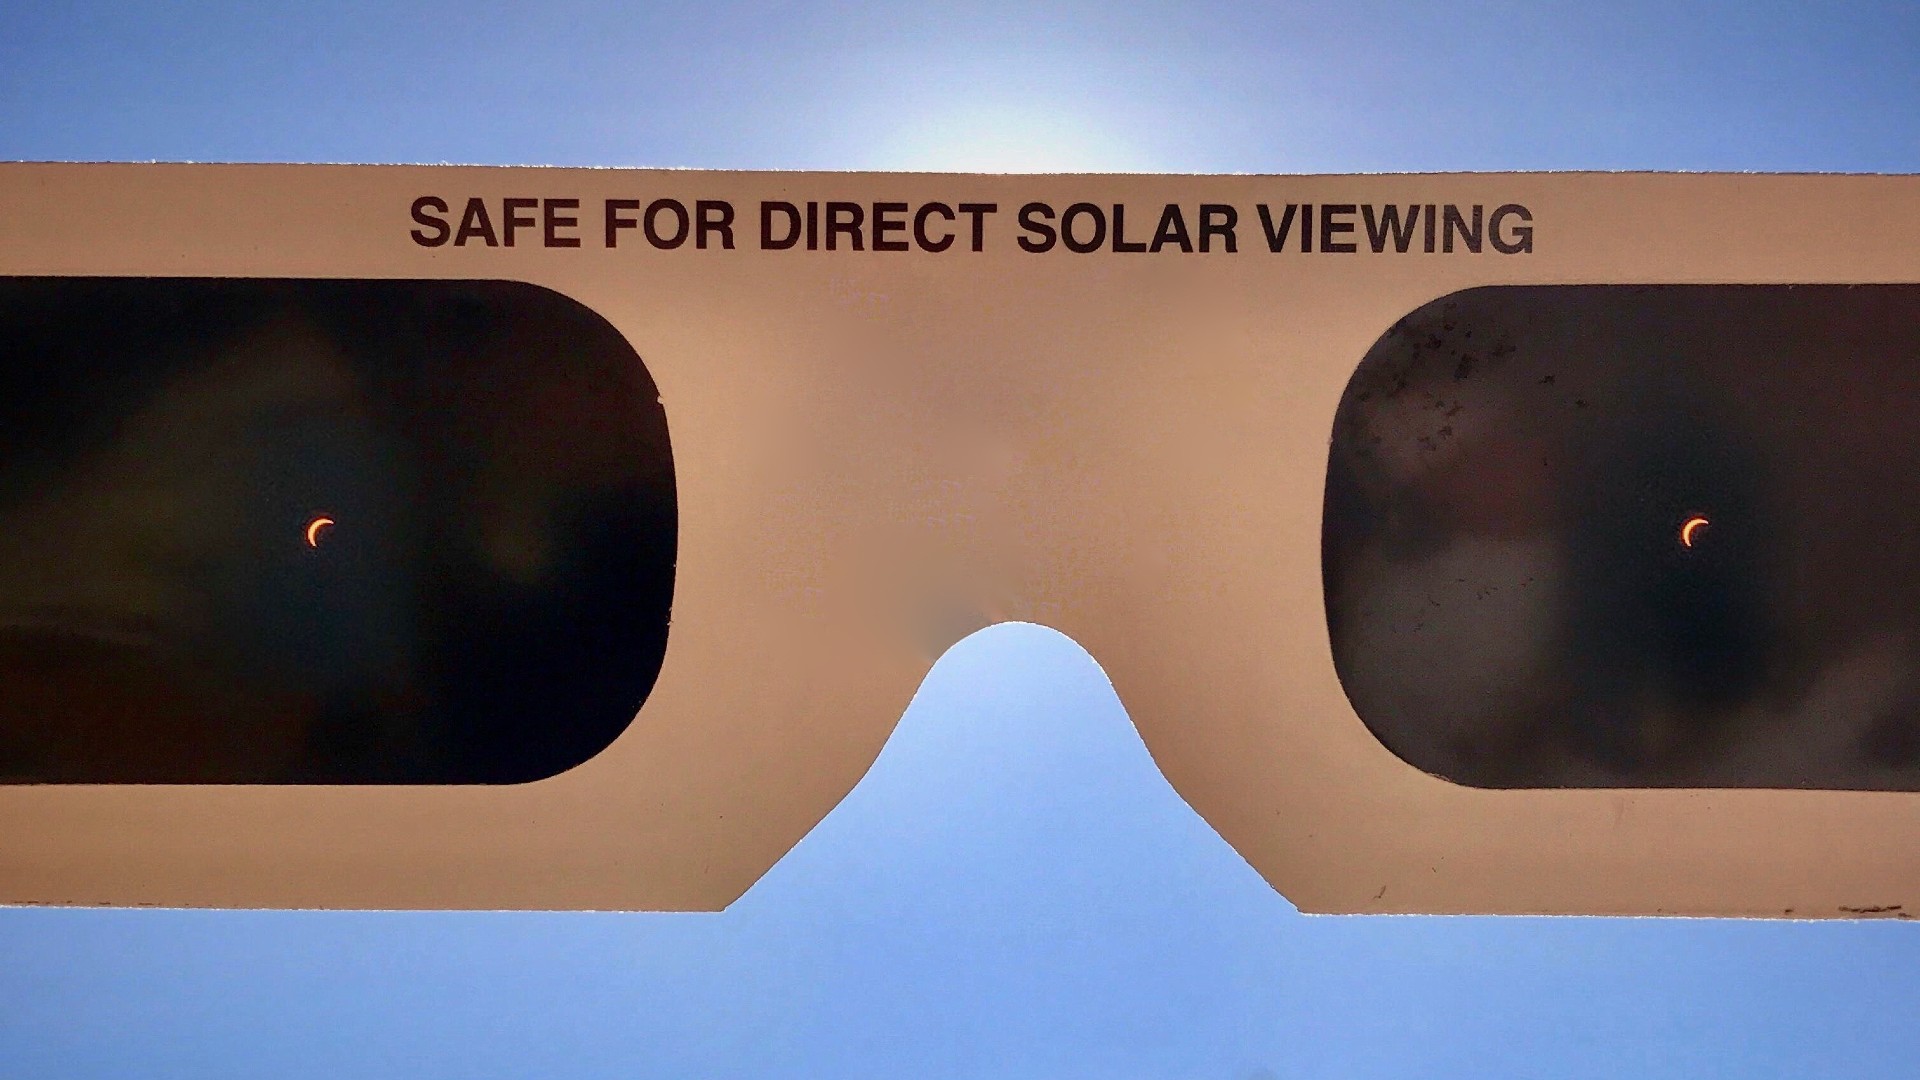 the sun can be seen through a pair of dark solar eclipse glasses held up to the sky